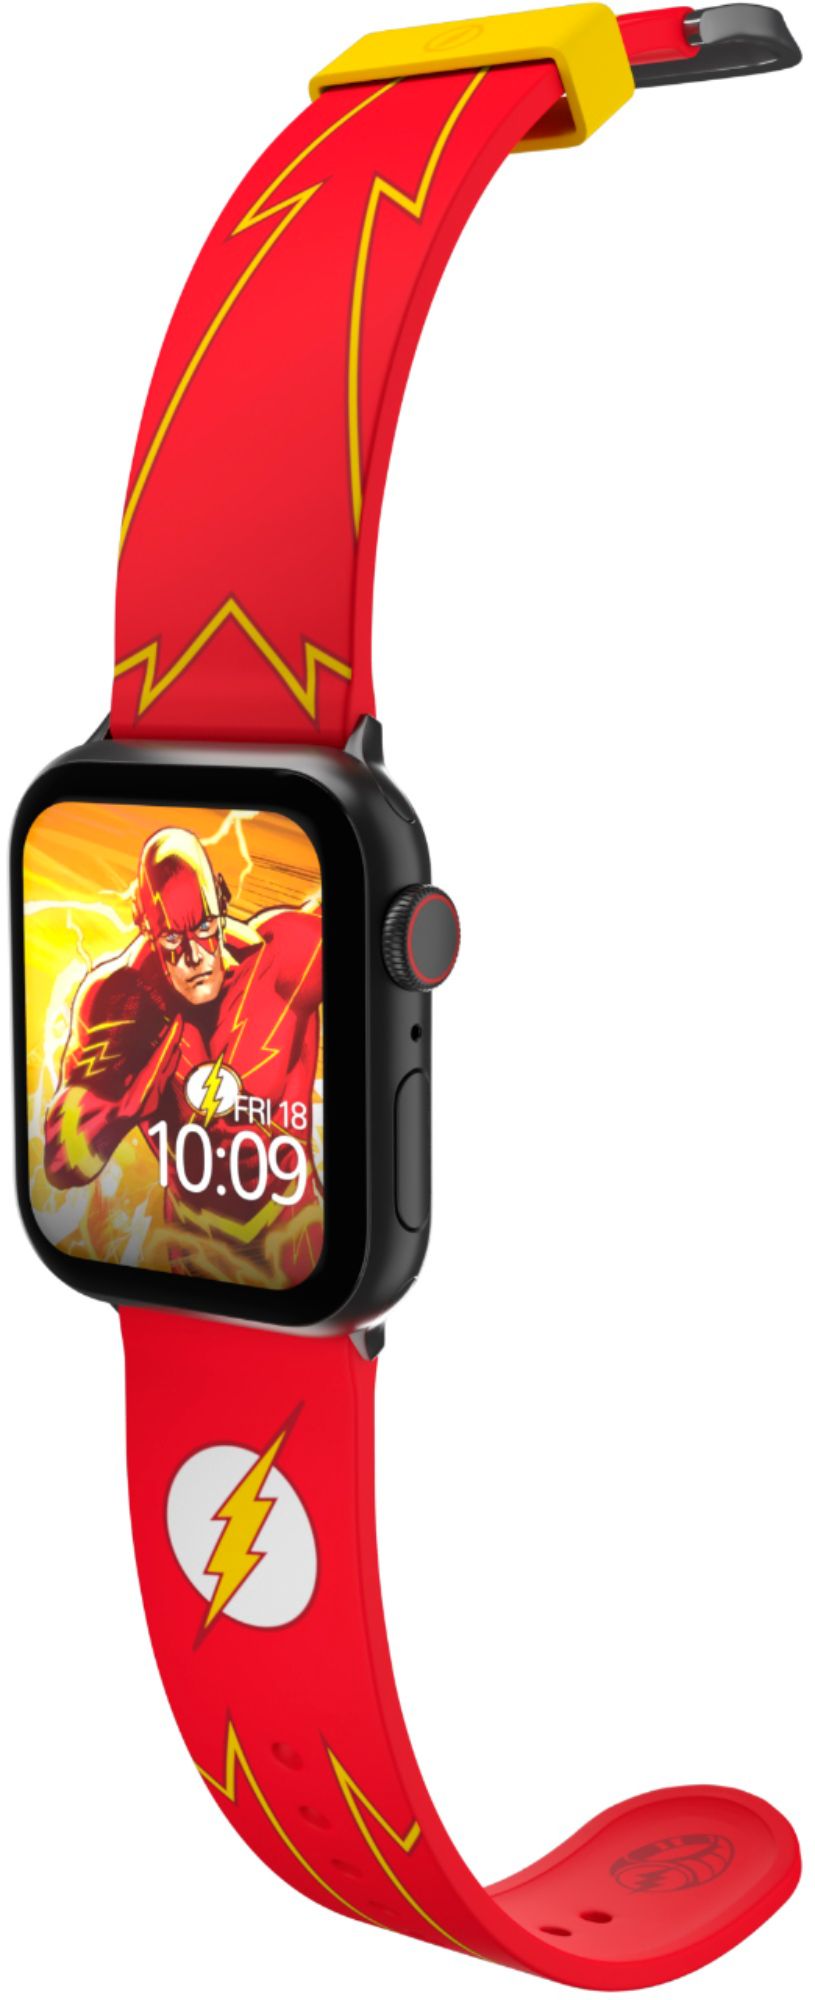 Left View: MobyFox - DC Comics - WW84 Golden Armor Smartwatch Band - Compatible with Apple Watch - Fits 38mm, 40mm, 42mm and 44mm